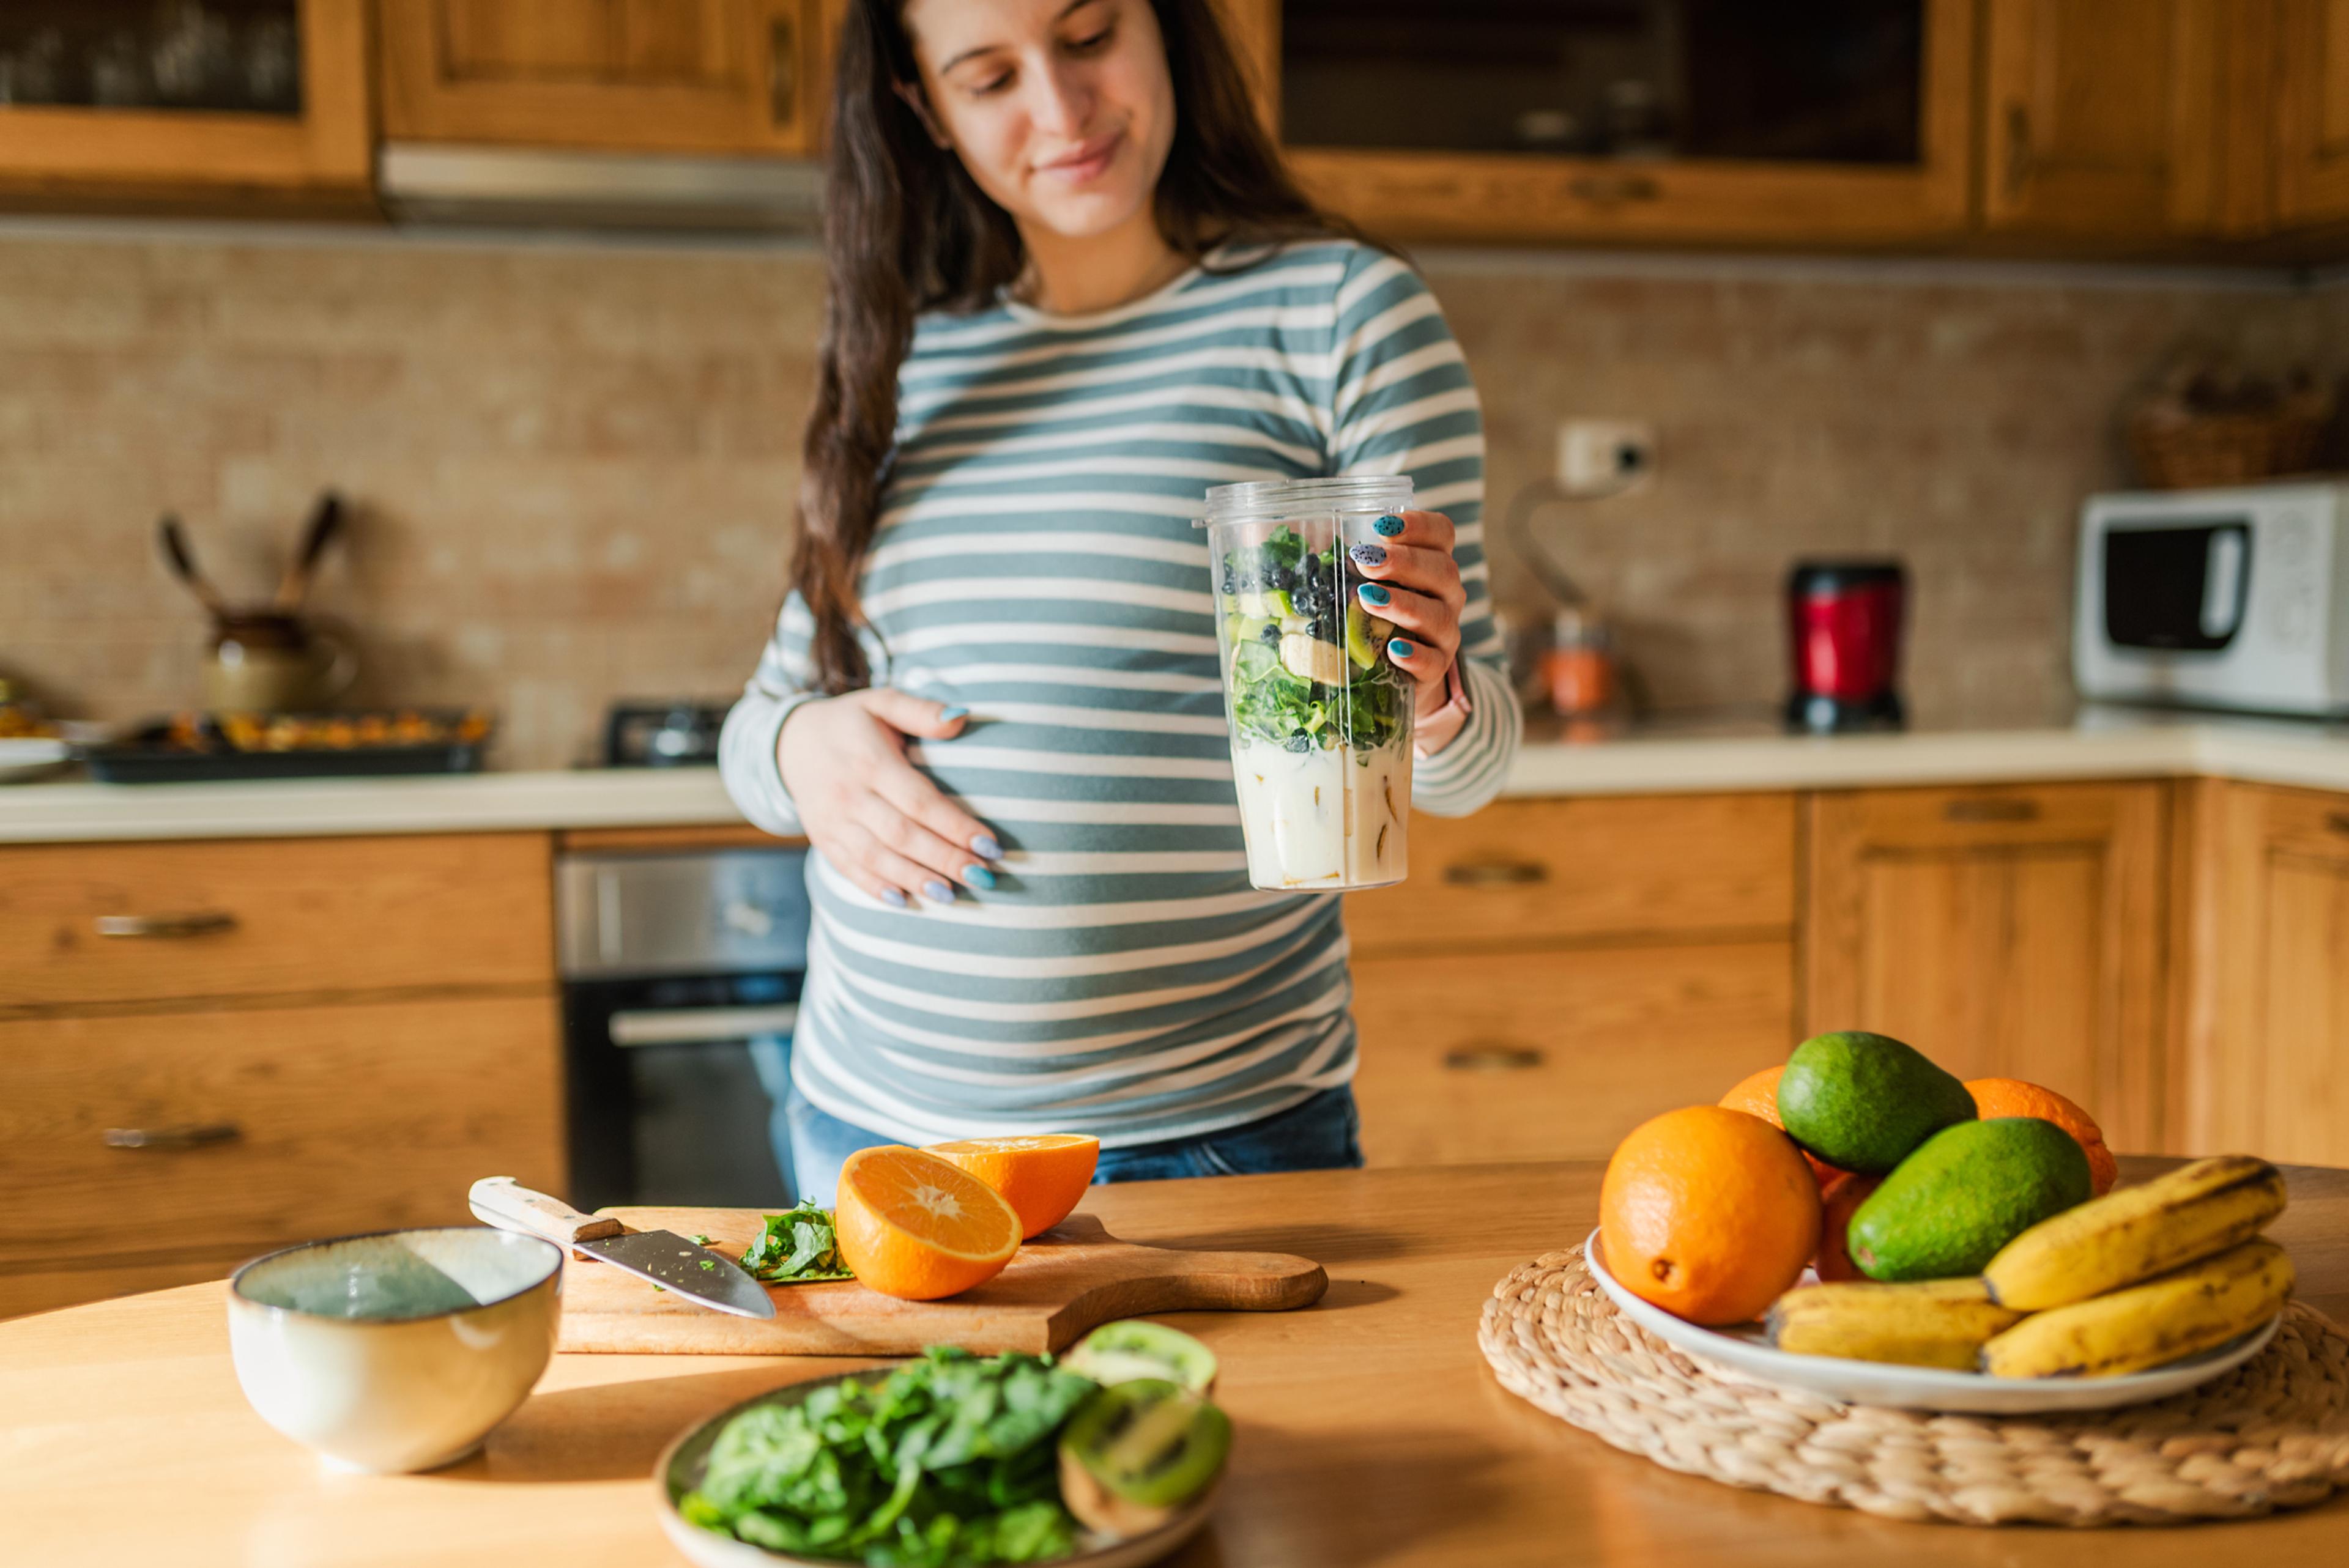 A pregnant woman preparing healthy snacks for her pregnancy.